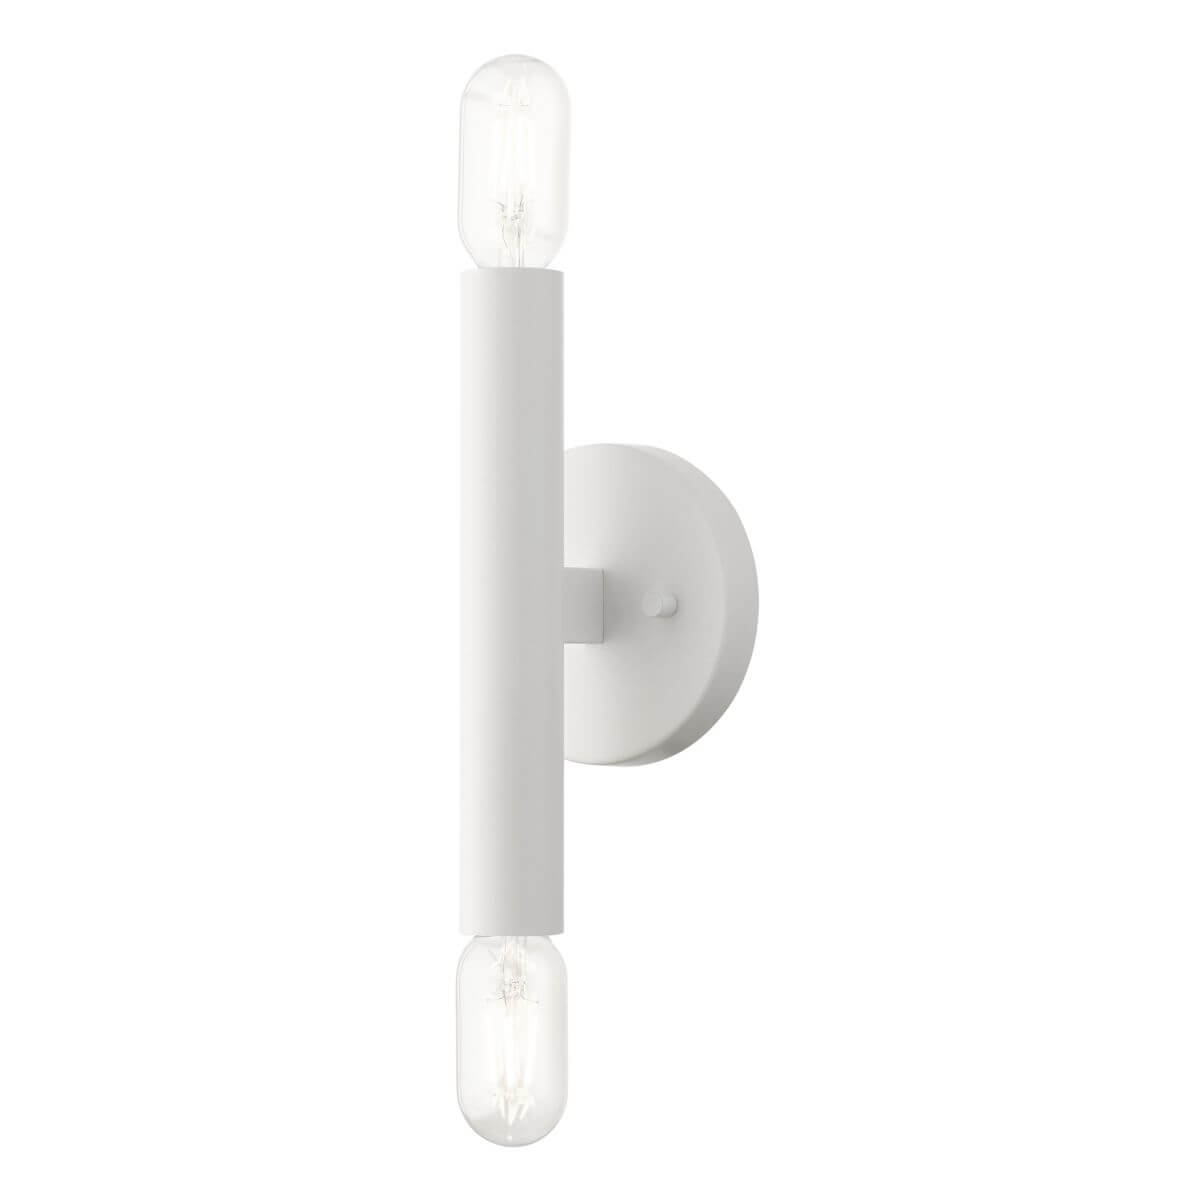 2 Light 10 inch Tall Wall Sconce in White - 245468